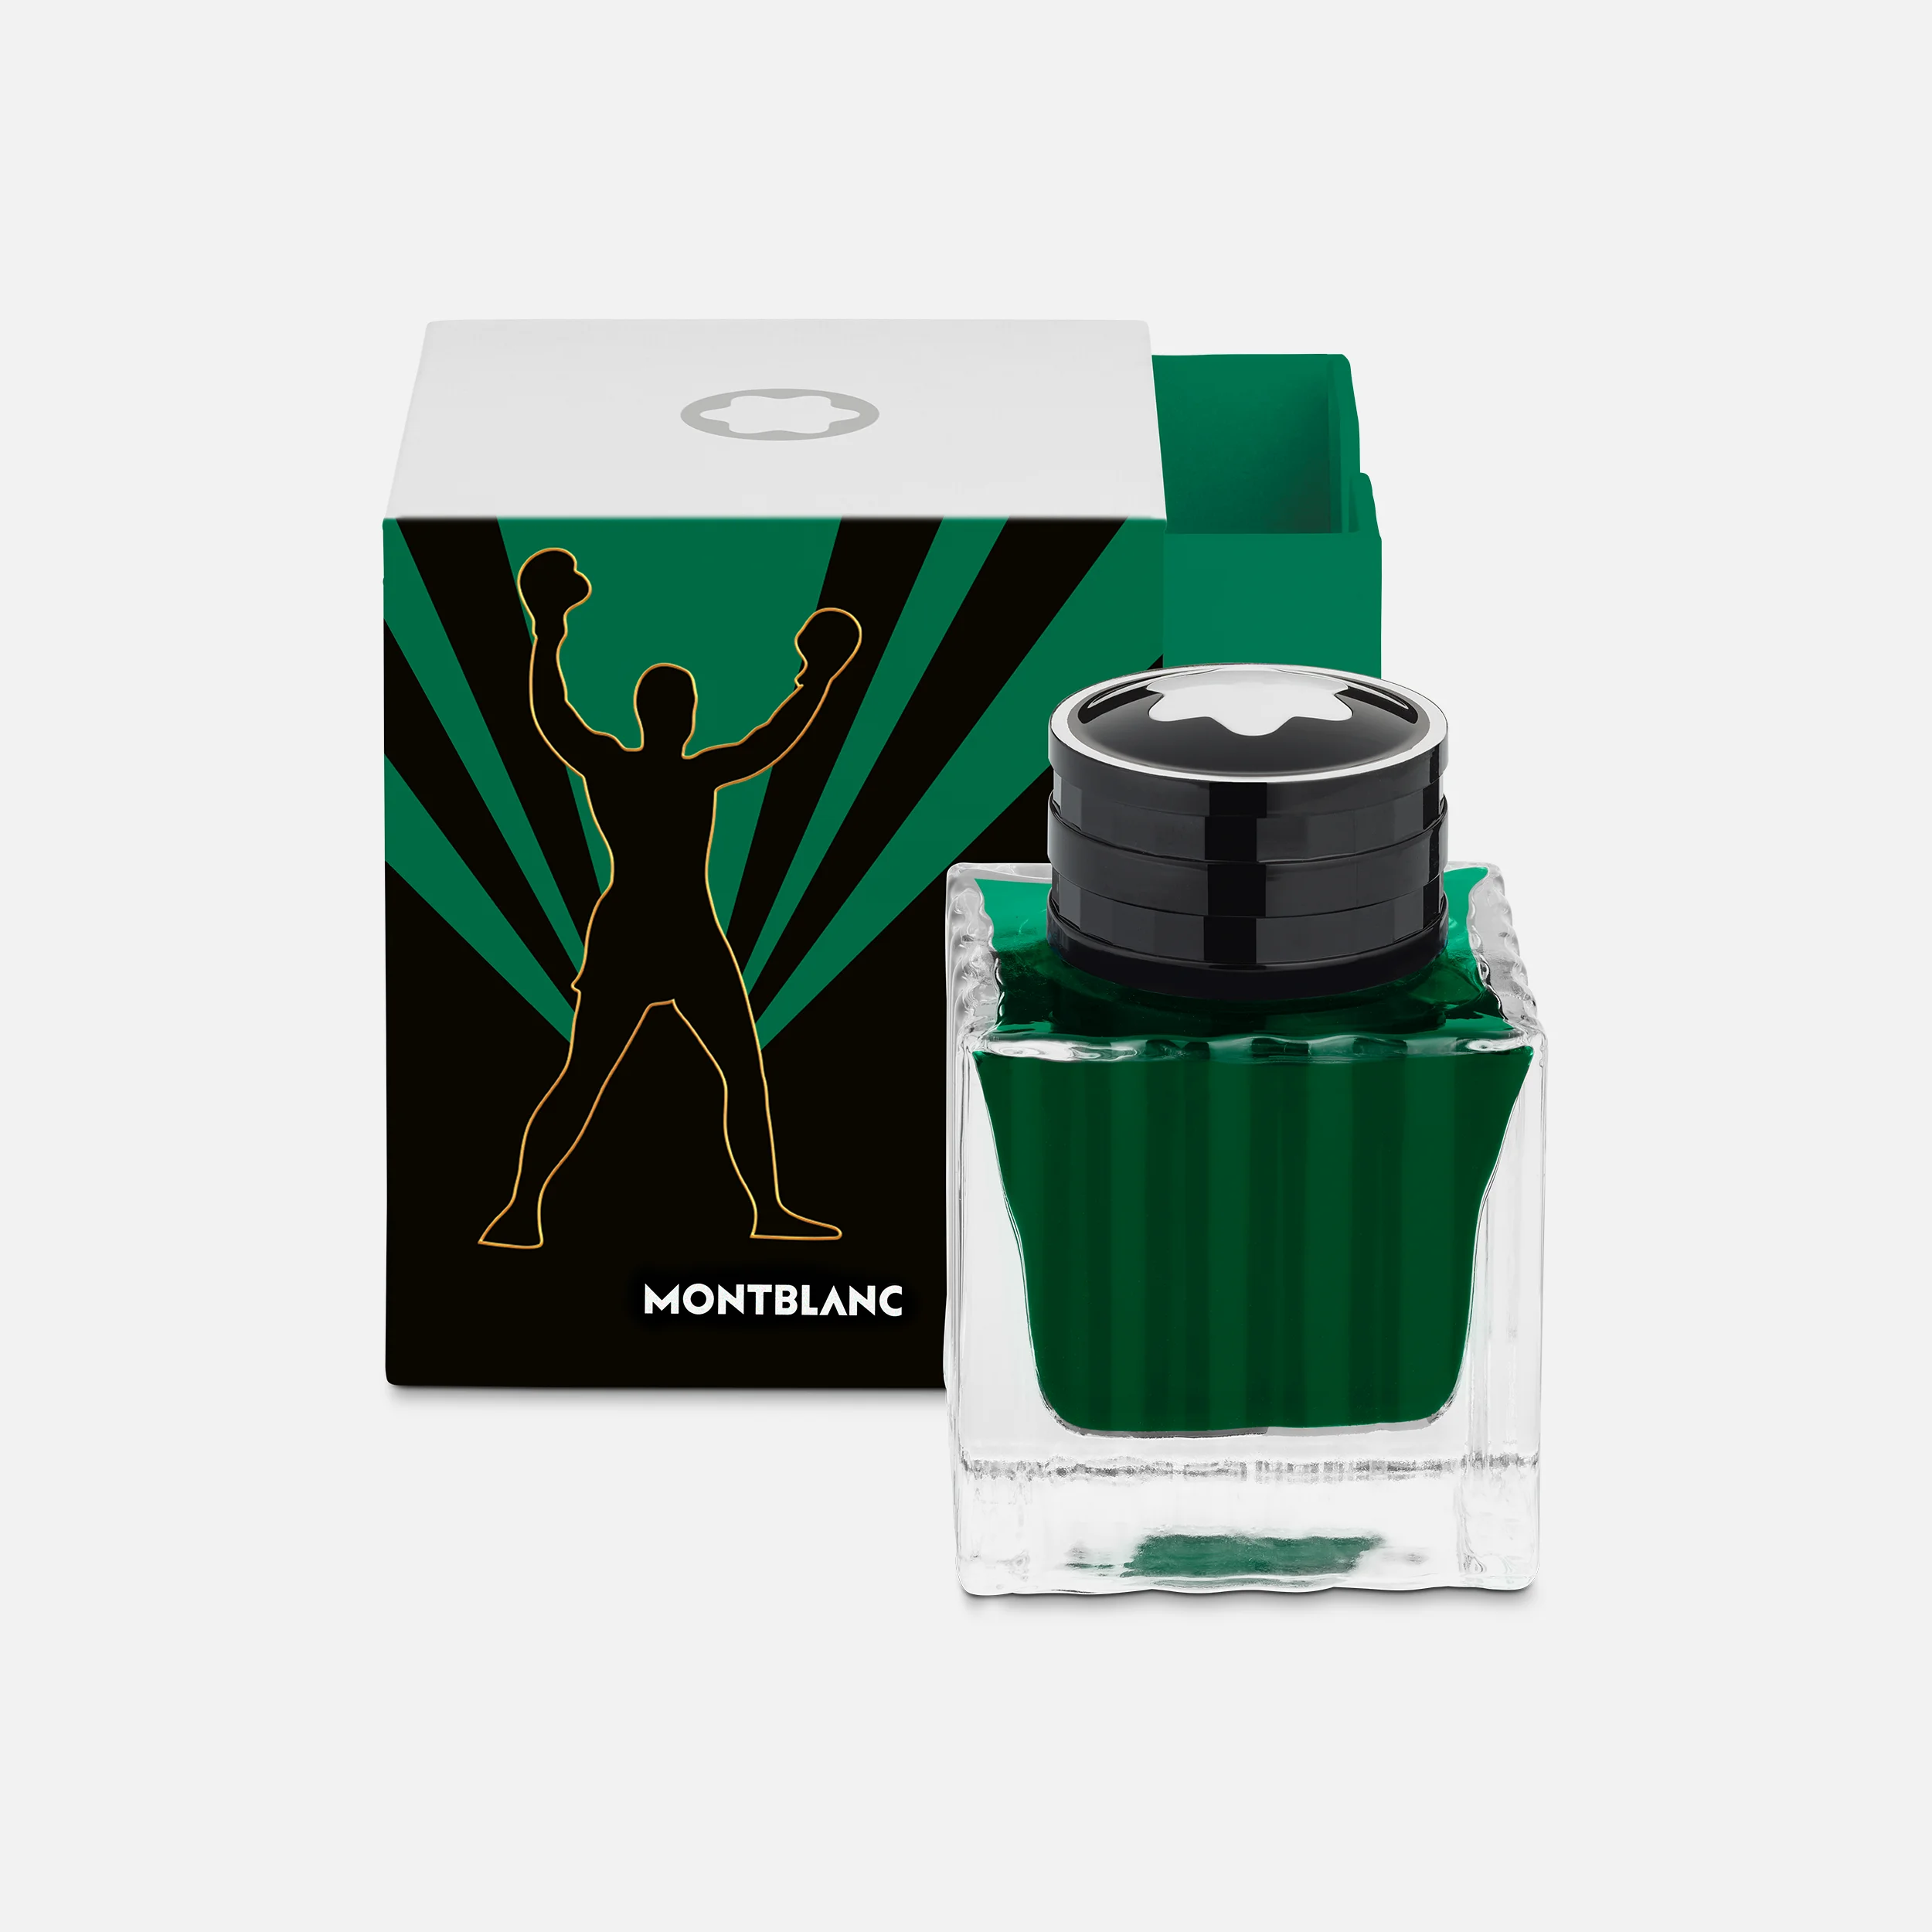 MONTBLANC INK BOTTLE 50 ML GREEN GREAT CHARACTERS MUHAMMAD ALI - Pencraft the boutique